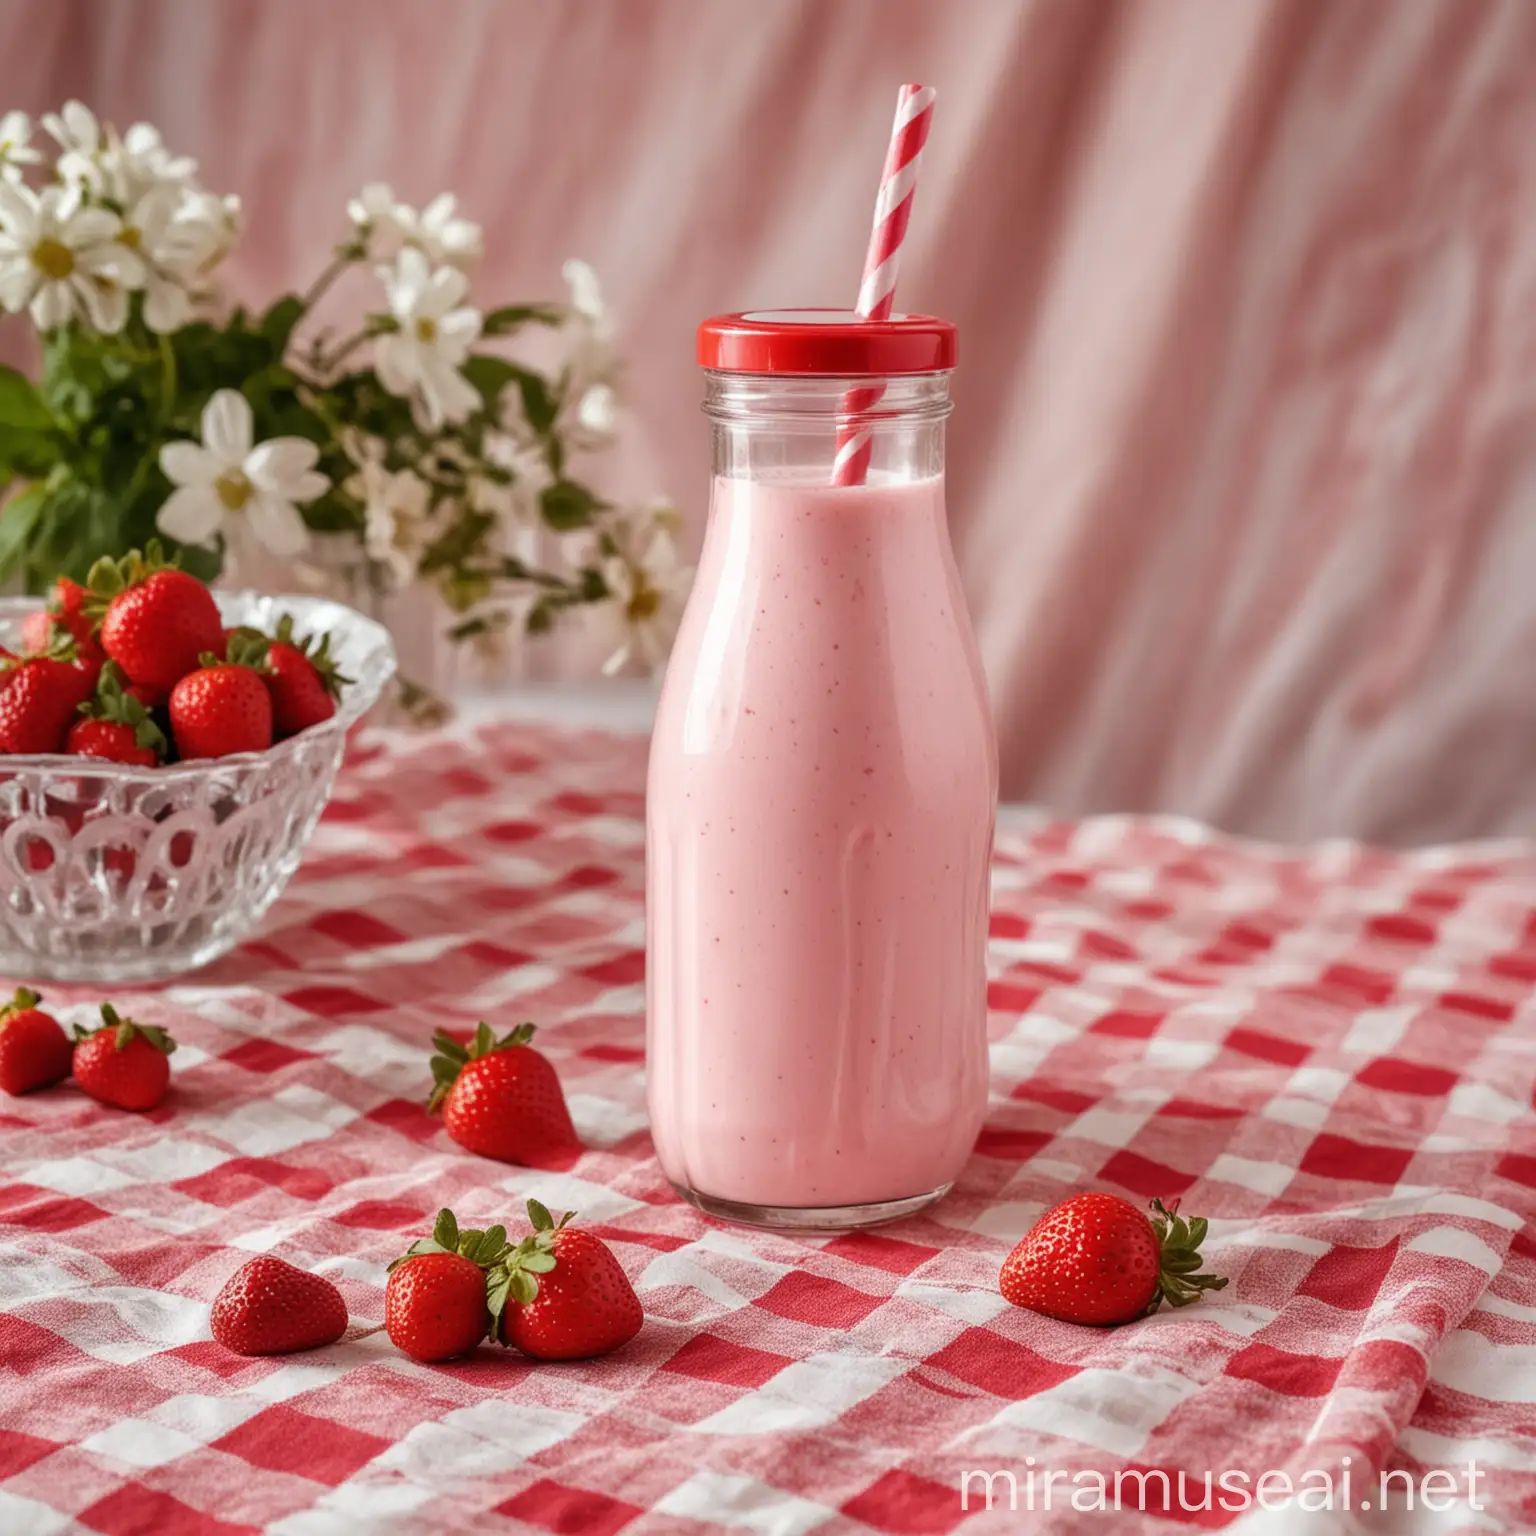 strawberry milkshake in a bottle on a table with a nice tablecloth